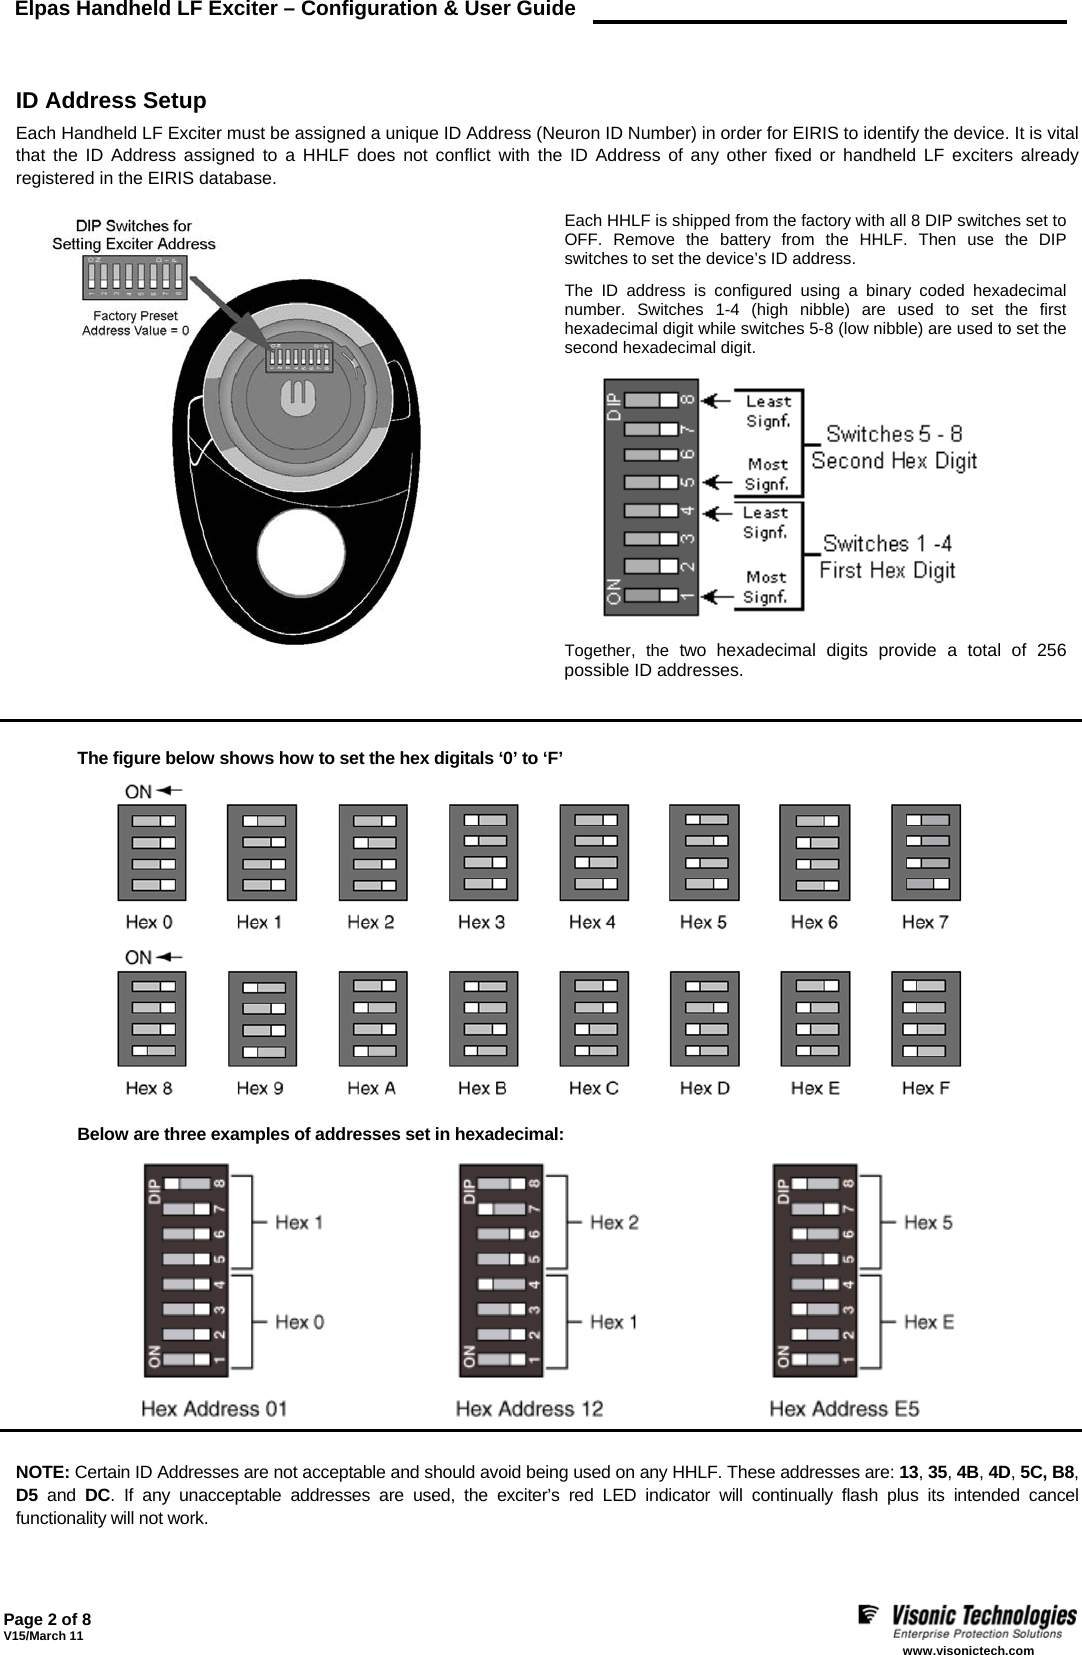 Elpas Handheld LF Exciter – Configuration &amp; User Guide    Page 2 of 8 V15/March 11    www.visonictech.com   ID Address Setup Each Handheld LF Exciter must be assigned a unique ID Address (Neuron ID Number) in order for EIRIS to identify the device. It is vital that the ID Address assigned to a HHLF does not conflict with the ID Address of any other fixed or handheld LF exciters already registered in the EIRIS database.    Each HHLF is shipped from the factory with all 8 DIP switches set to OFF. Remove the battery from the HHLF. Then use the DIP switches to set the device’s ID address.  The ID address is configured using a binary coded hexadecimal number. Switches 1-4 (high nibble) are used to set the first hexadecimal digit while switches 5-8 (low nibble) are used to set the second hexadecimal digit.  Together, the two hexadecimal digits provide a total of 256 possible ID addresses.   The figure below shows how to set the hex digitals ‘0’ to ‘F’   Below are three examples of addresses set in hexadecimal:     NOTE: Certain ID Addresses are not acceptable and should avoid being used on any HHLF. These addresses are: 13, 35, 4B, 4D, 5C, B8, D5 and DC. If any unacceptable addresses are used, the exciter’s red LED indicator will continually flash plus its intended cancel functionality will not work. 